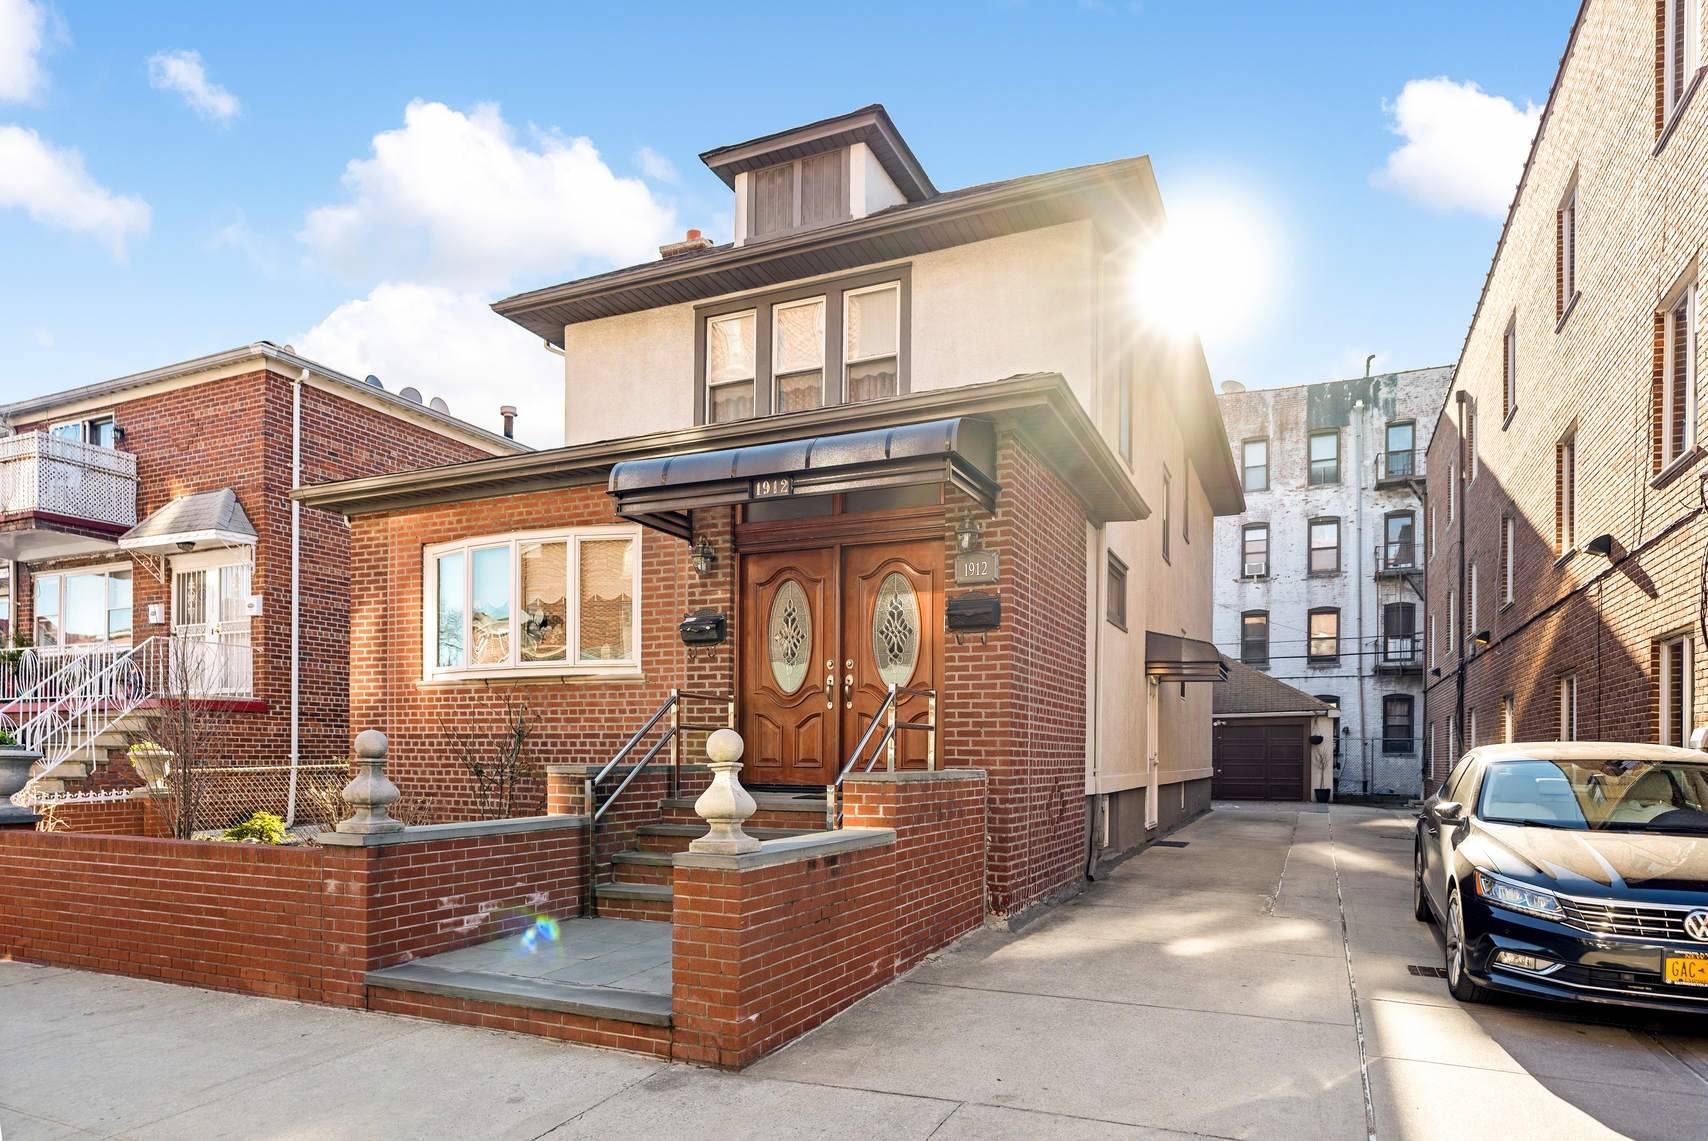 Prime Bensonhurst ! Great opportunity to own a two family brick house on a 40x100 lot.